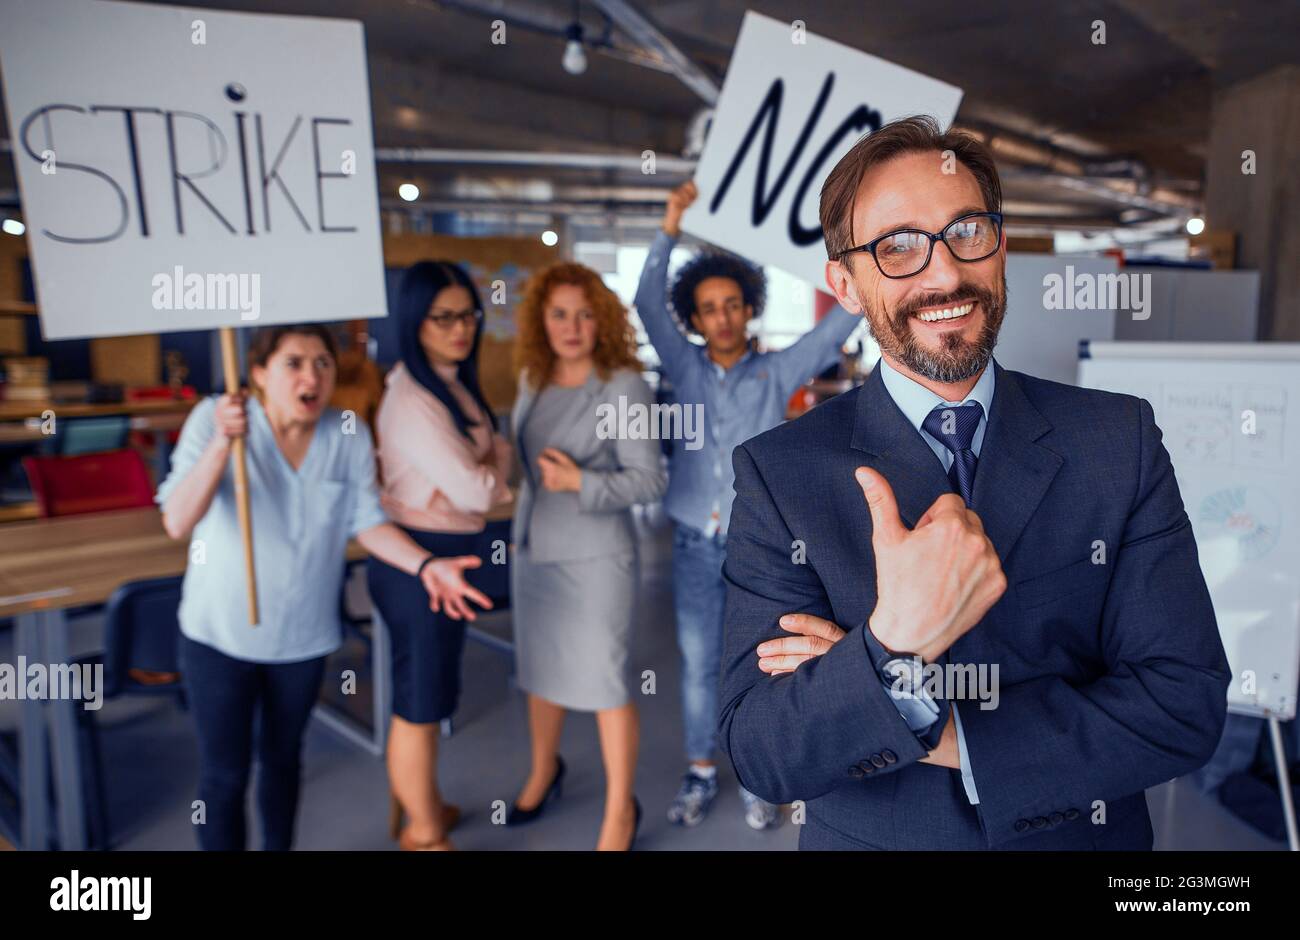 Laughing director showing thumb up, striking employees on backdrop. Stock Photo